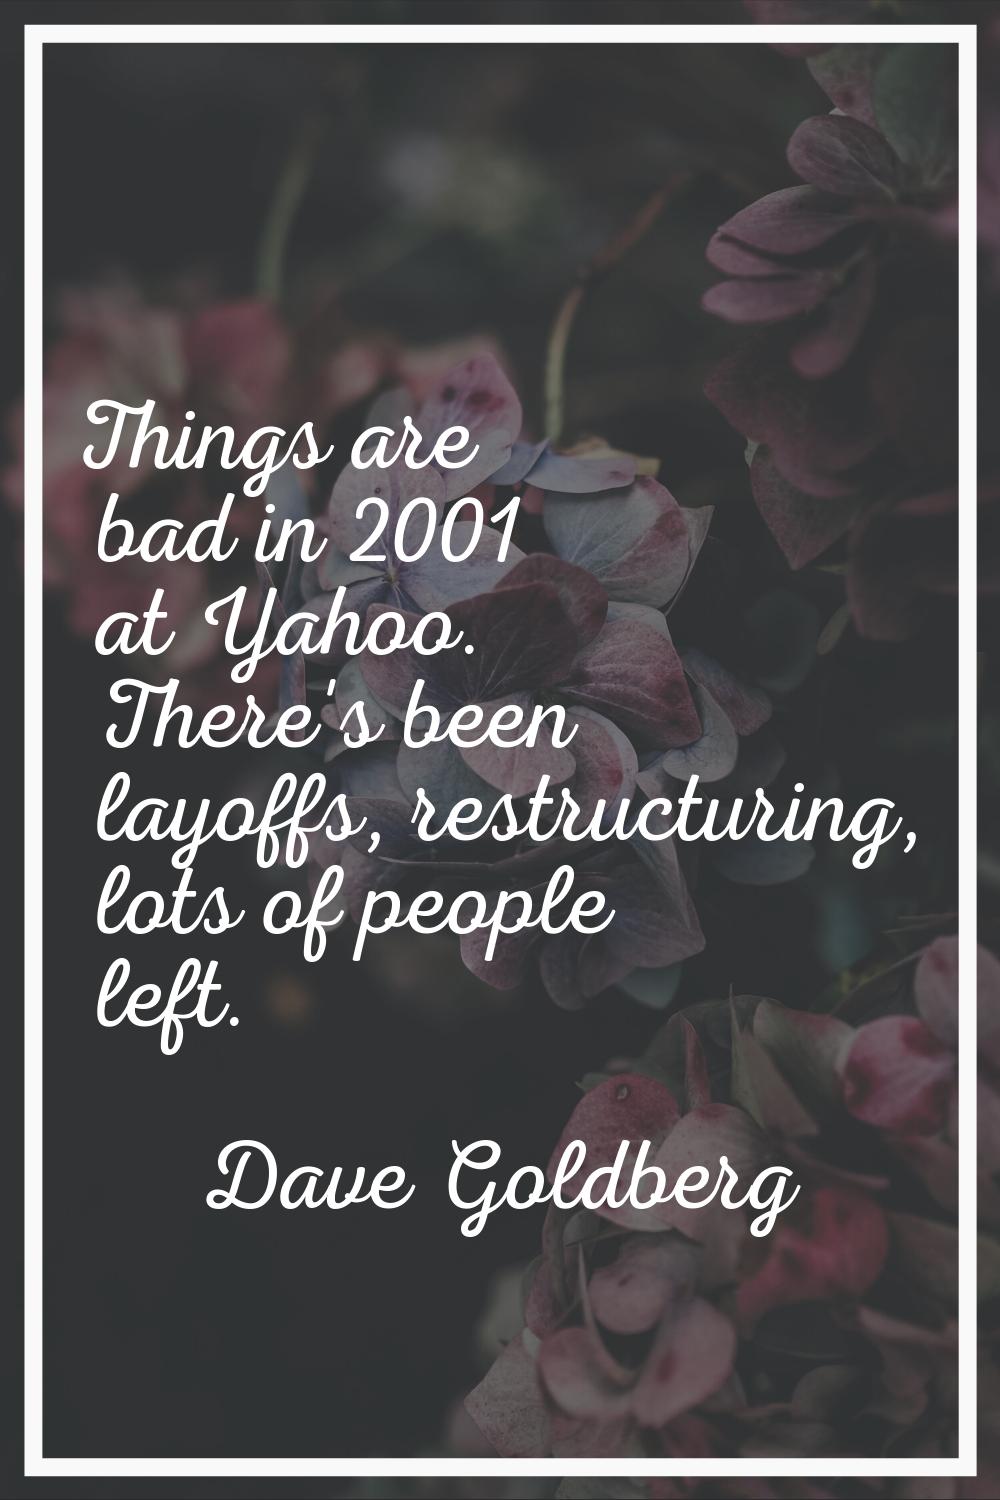 Things are bad in 2001 at Yahoo. There's been layoffs, restructuring, lots of people left.